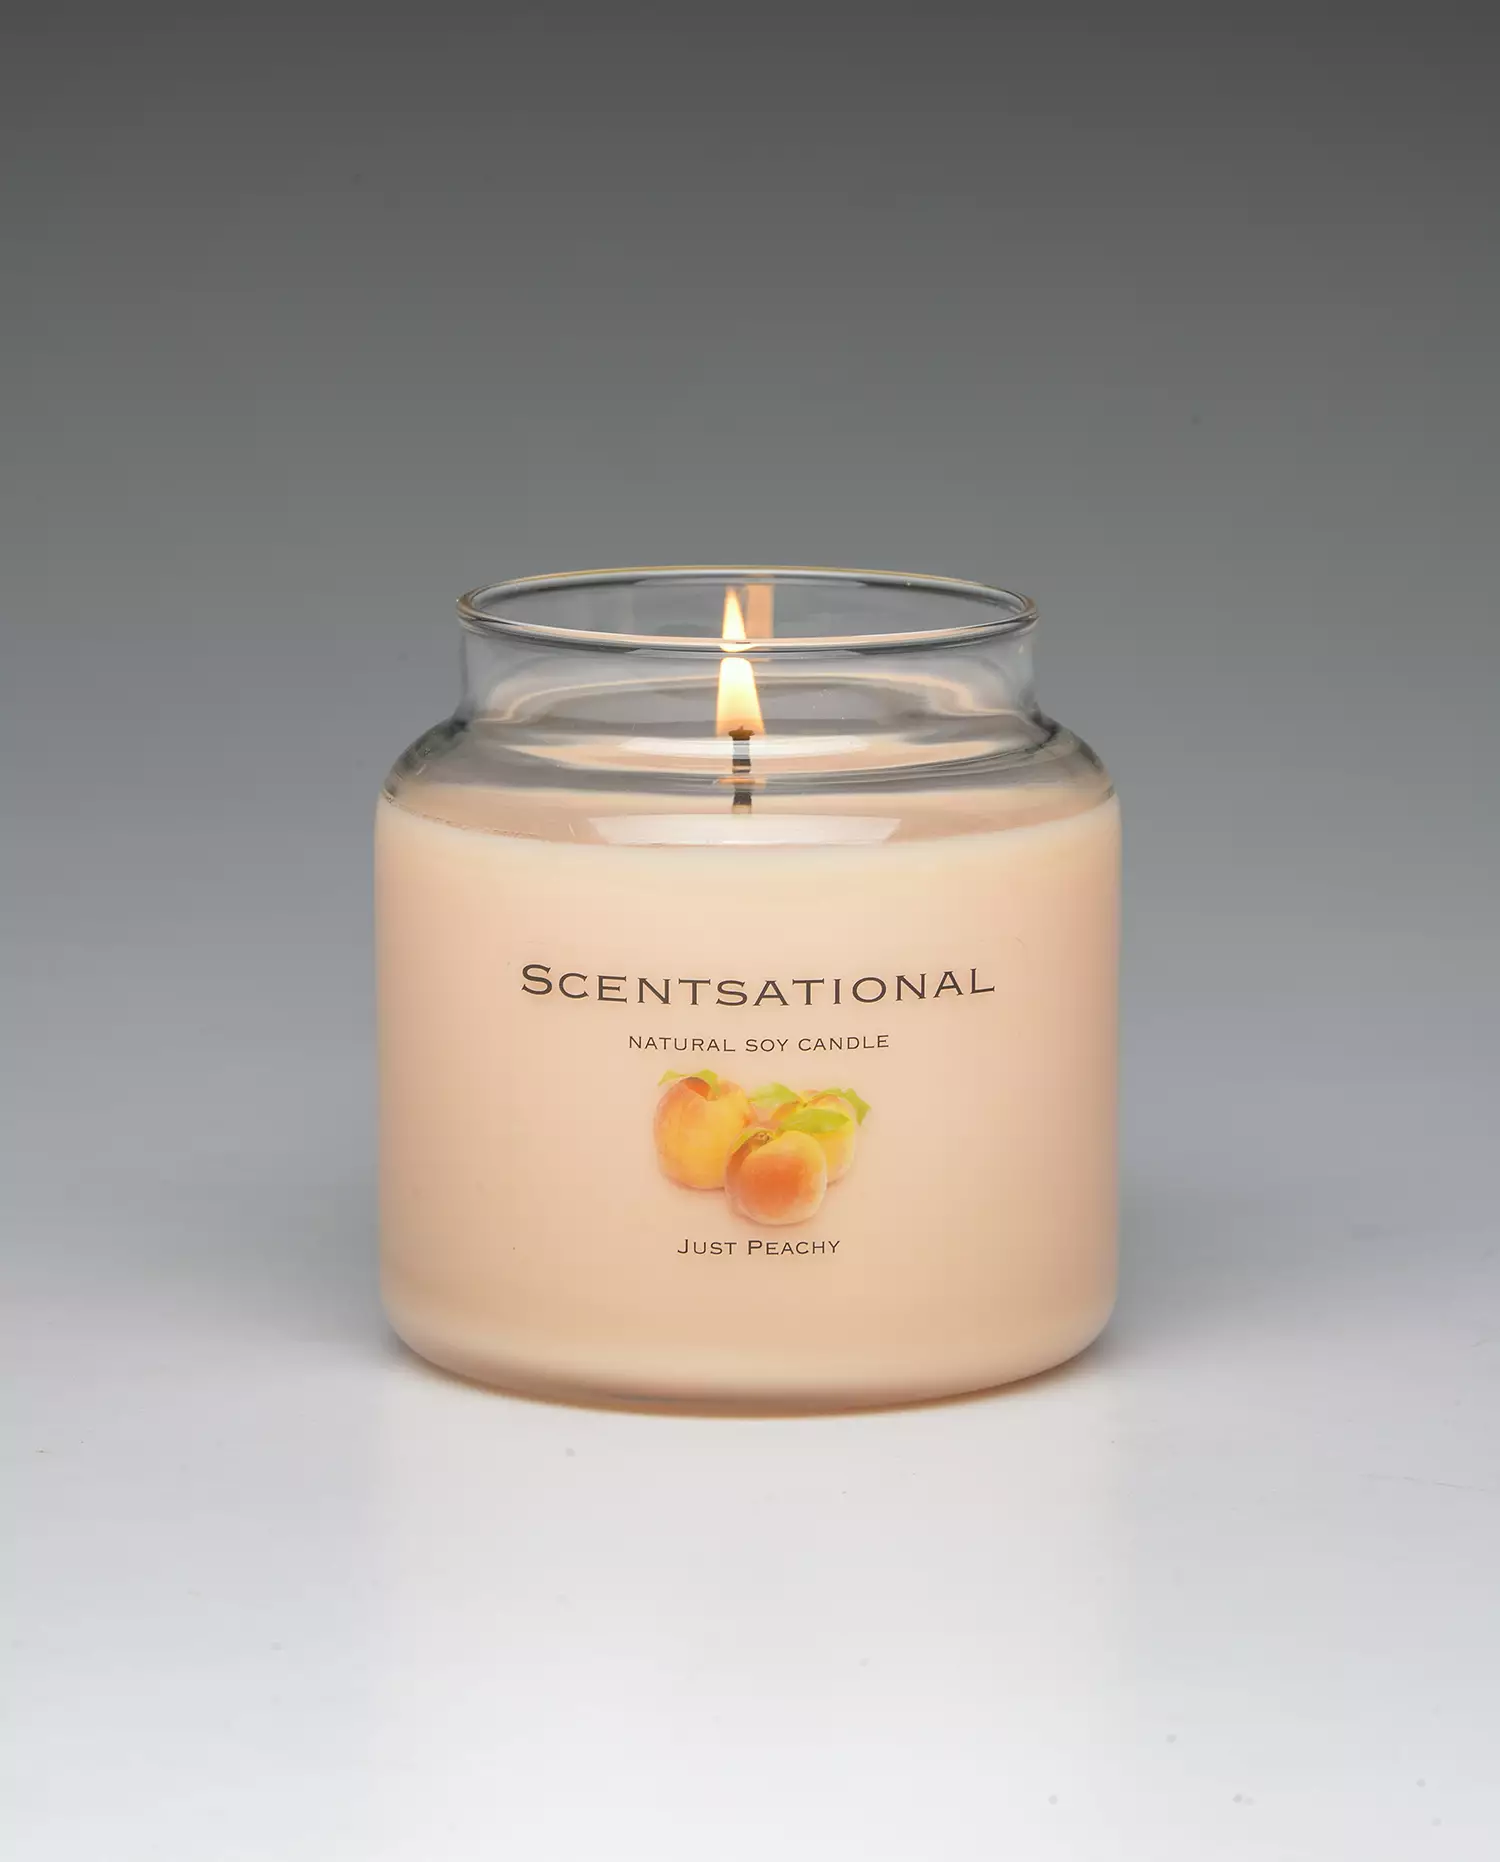 Just Peachy 19oz scented candle burning